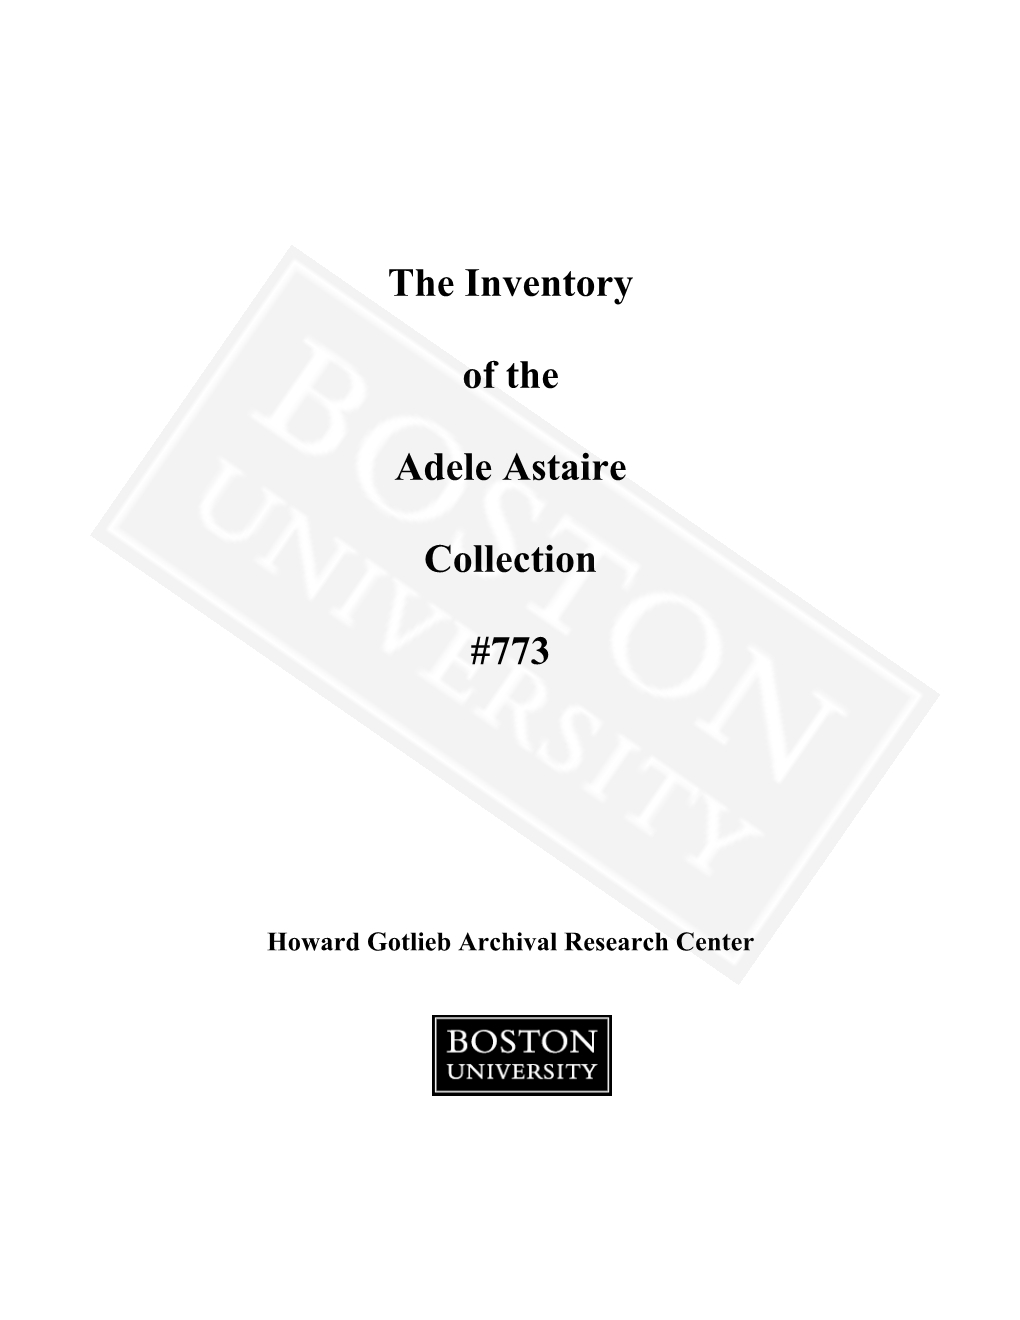 The Inventory of the Adele Astaire Collection #773